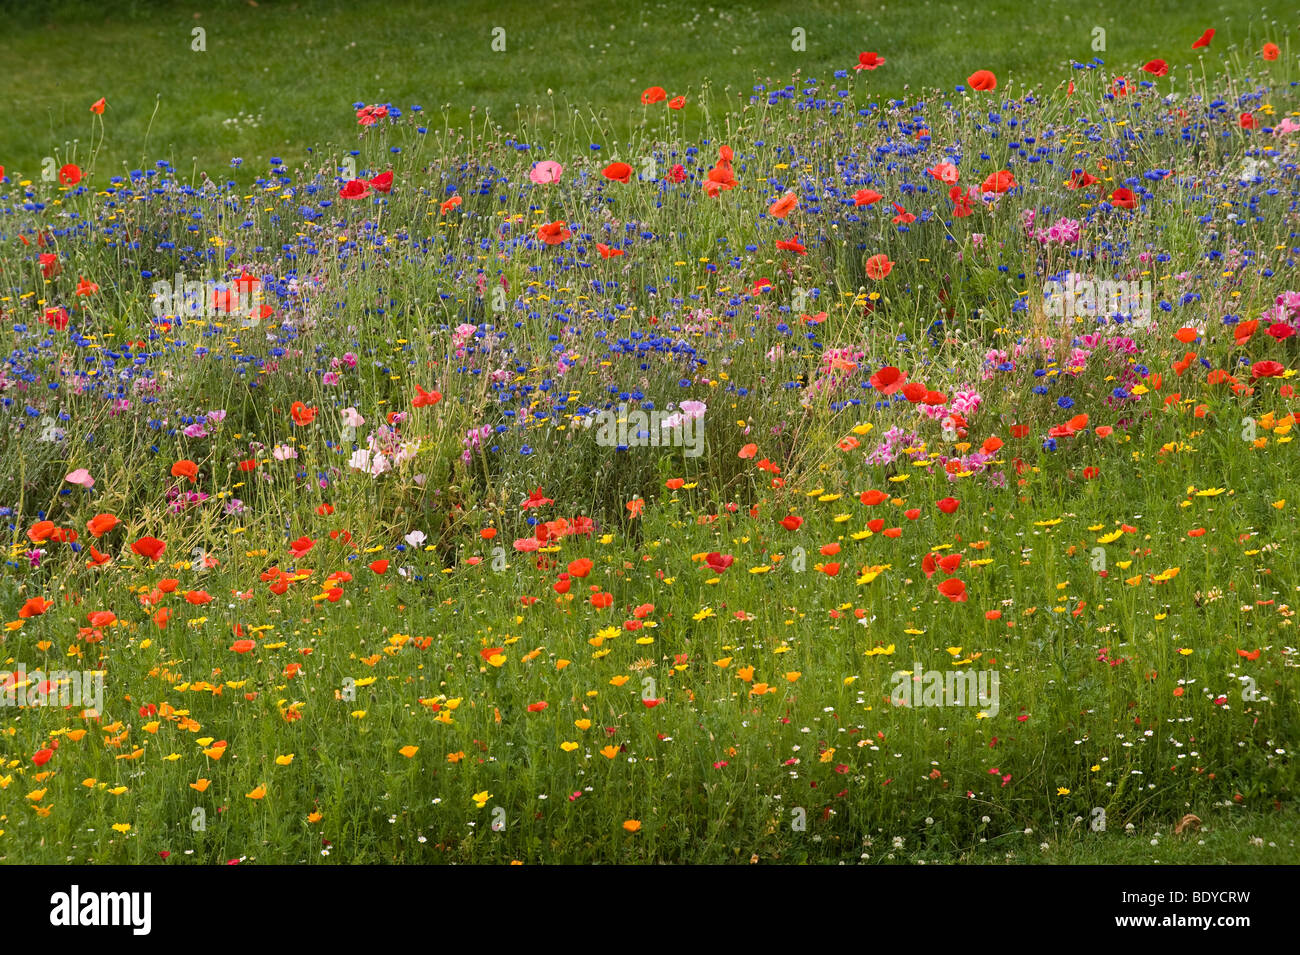 Flower meadow, Jardin des Plantes, Avranches, Basse-Normandie, Lower Normandy, France, Europe Stock Photo